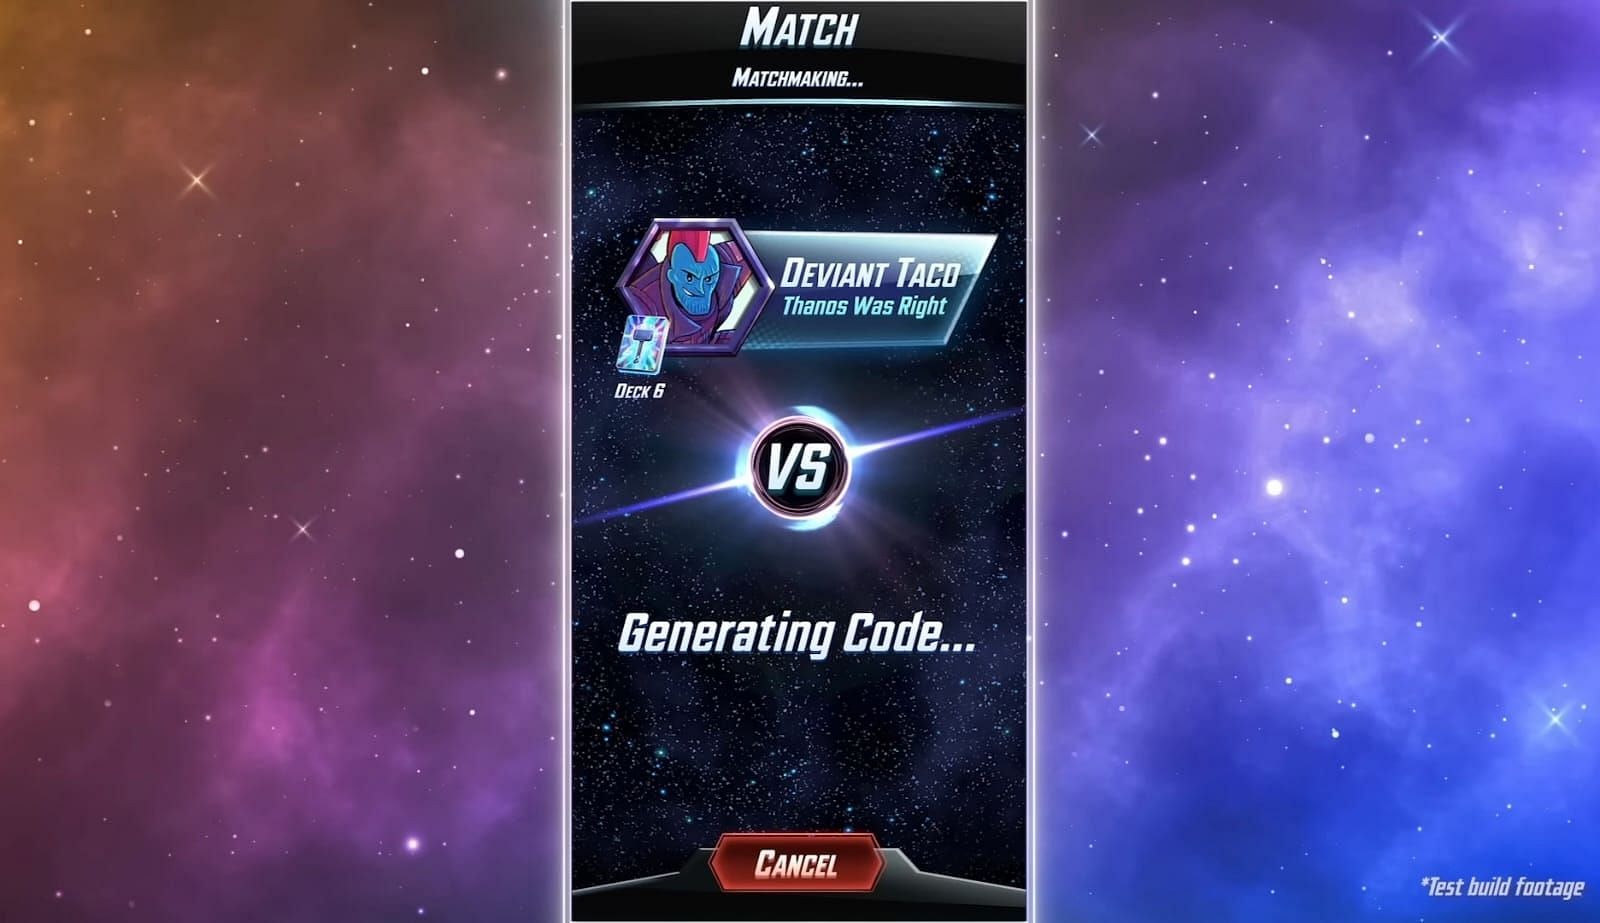 Generate code and share with your friend (Image via YouTube/Marvel Entertainment)